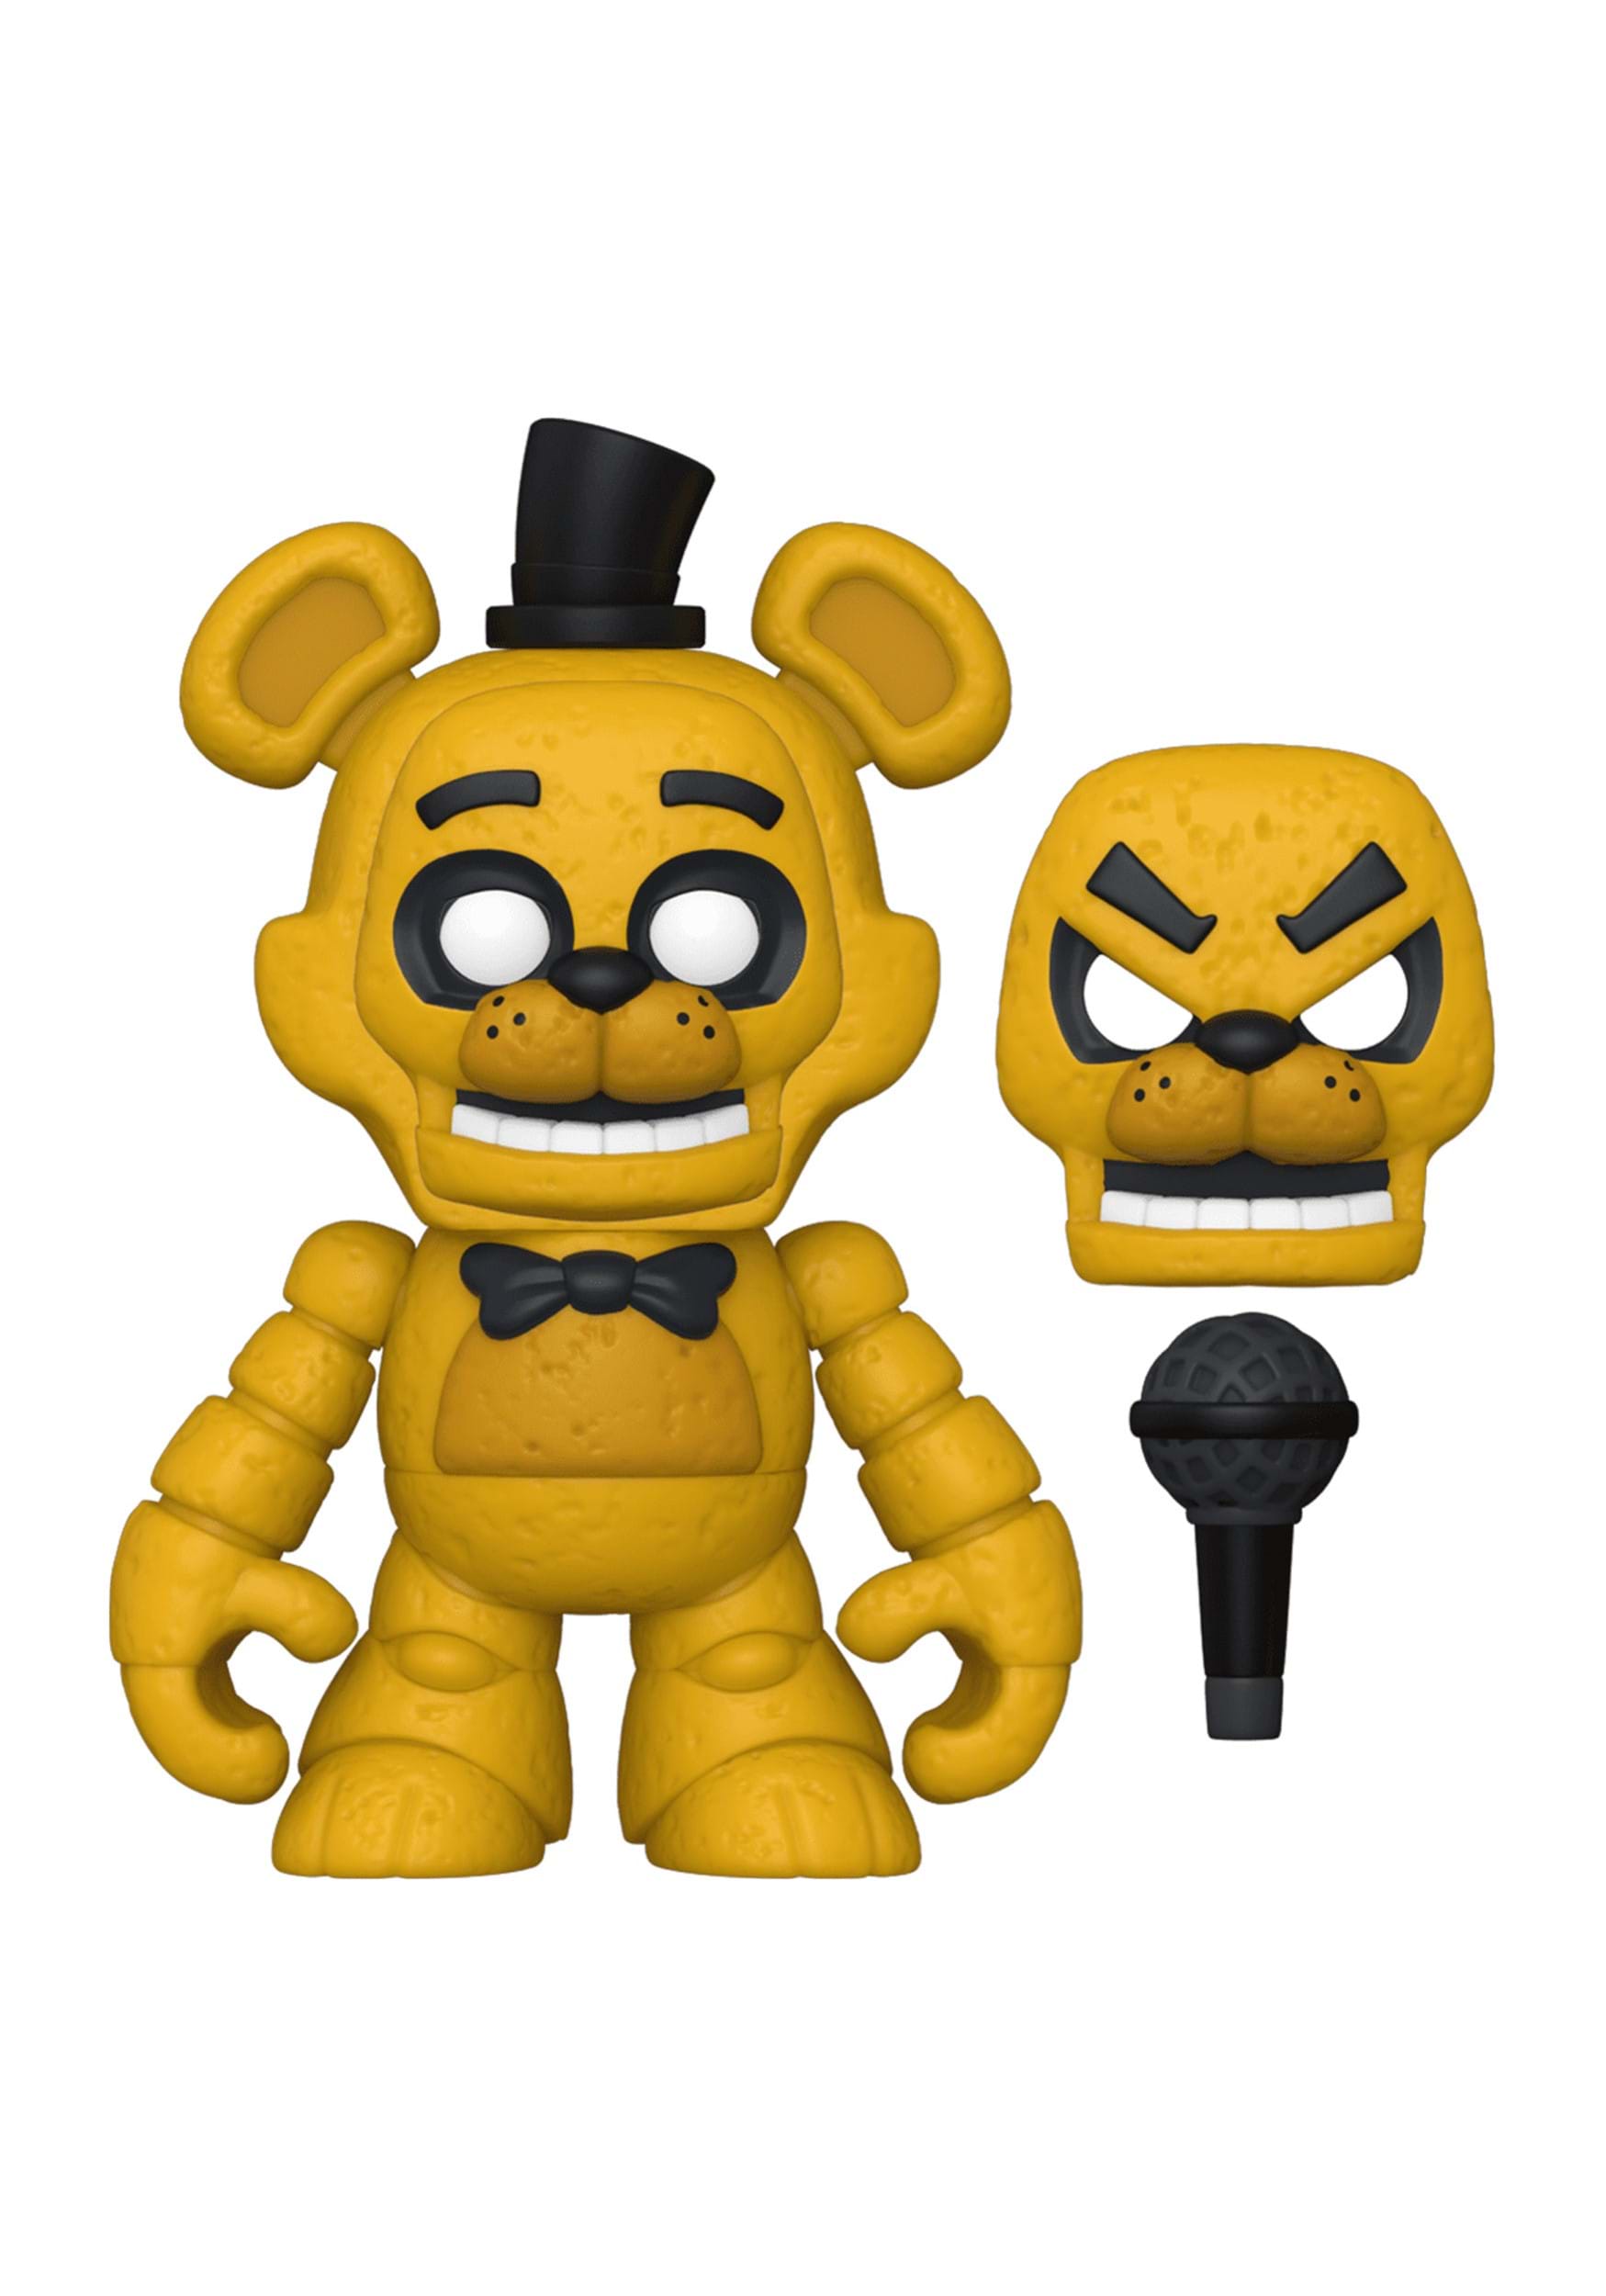 https://images.fun.com/products/88911/1-1/five-nights-at-freddys-snap-stage-with-gold-freddy.jpg